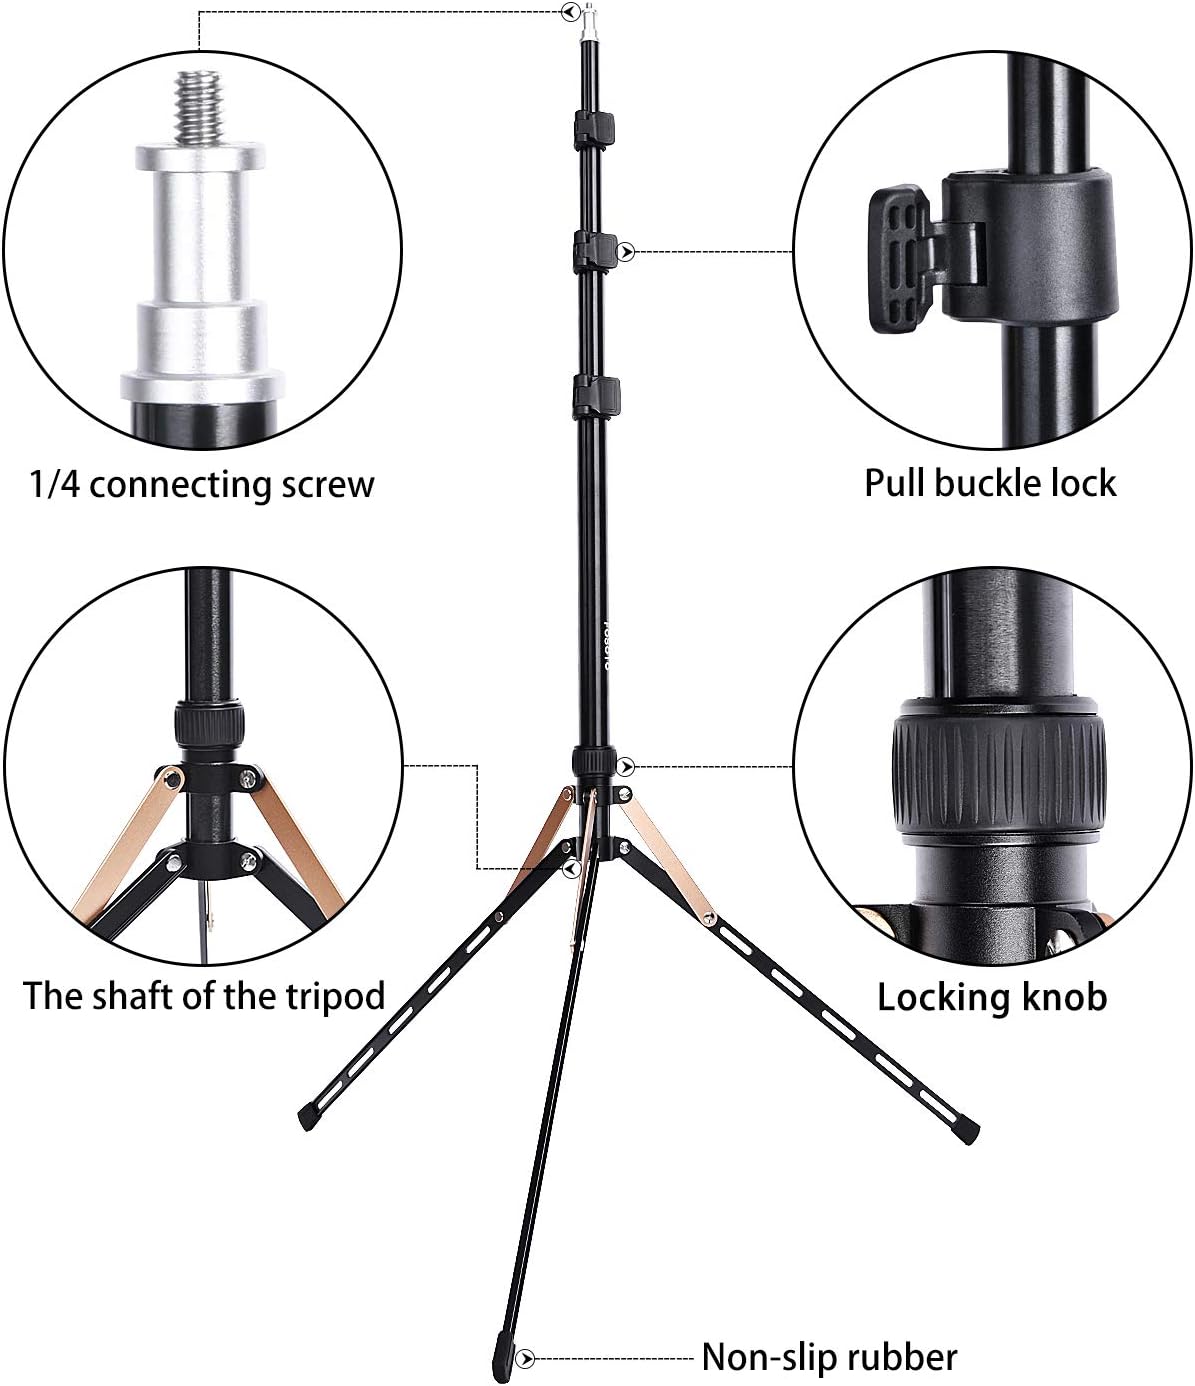 FOSOTO 75in gold Fold Tripod Light Stand